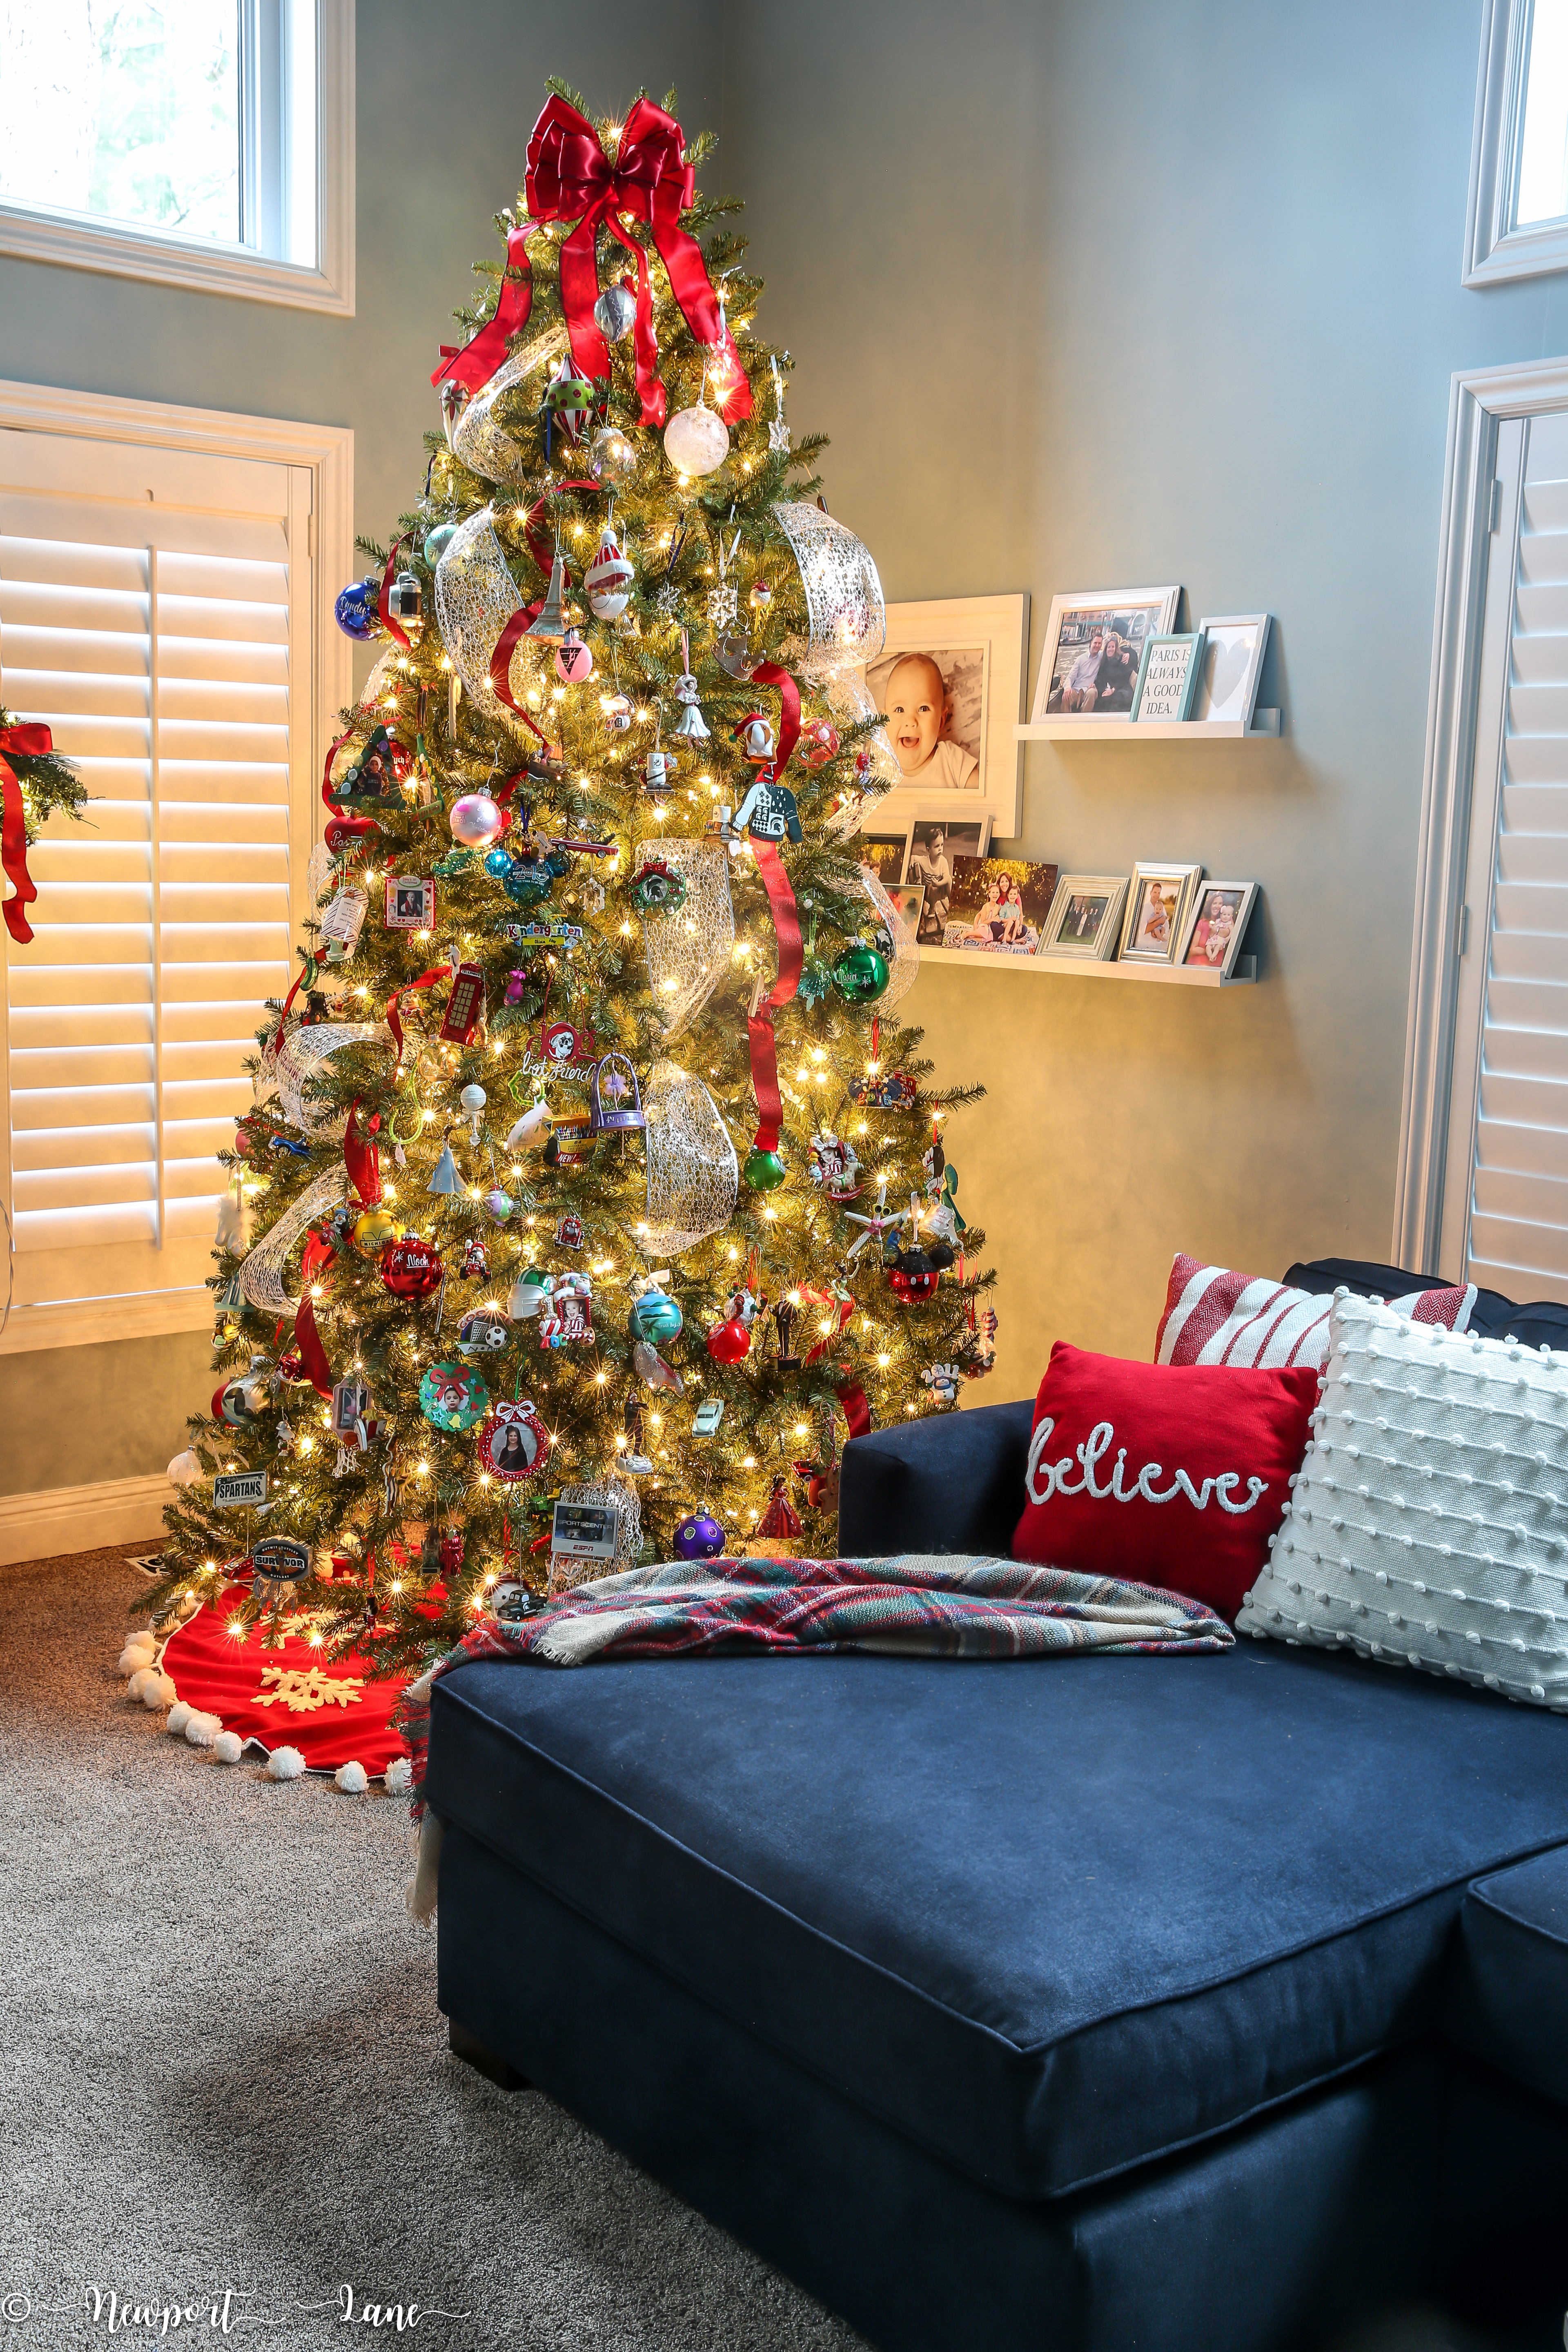 Traditional red and green Christmas decor for family rooms, Christmas trees, front porches, mantles and holiday tables. #colorscheme #christmasdecor #christmas